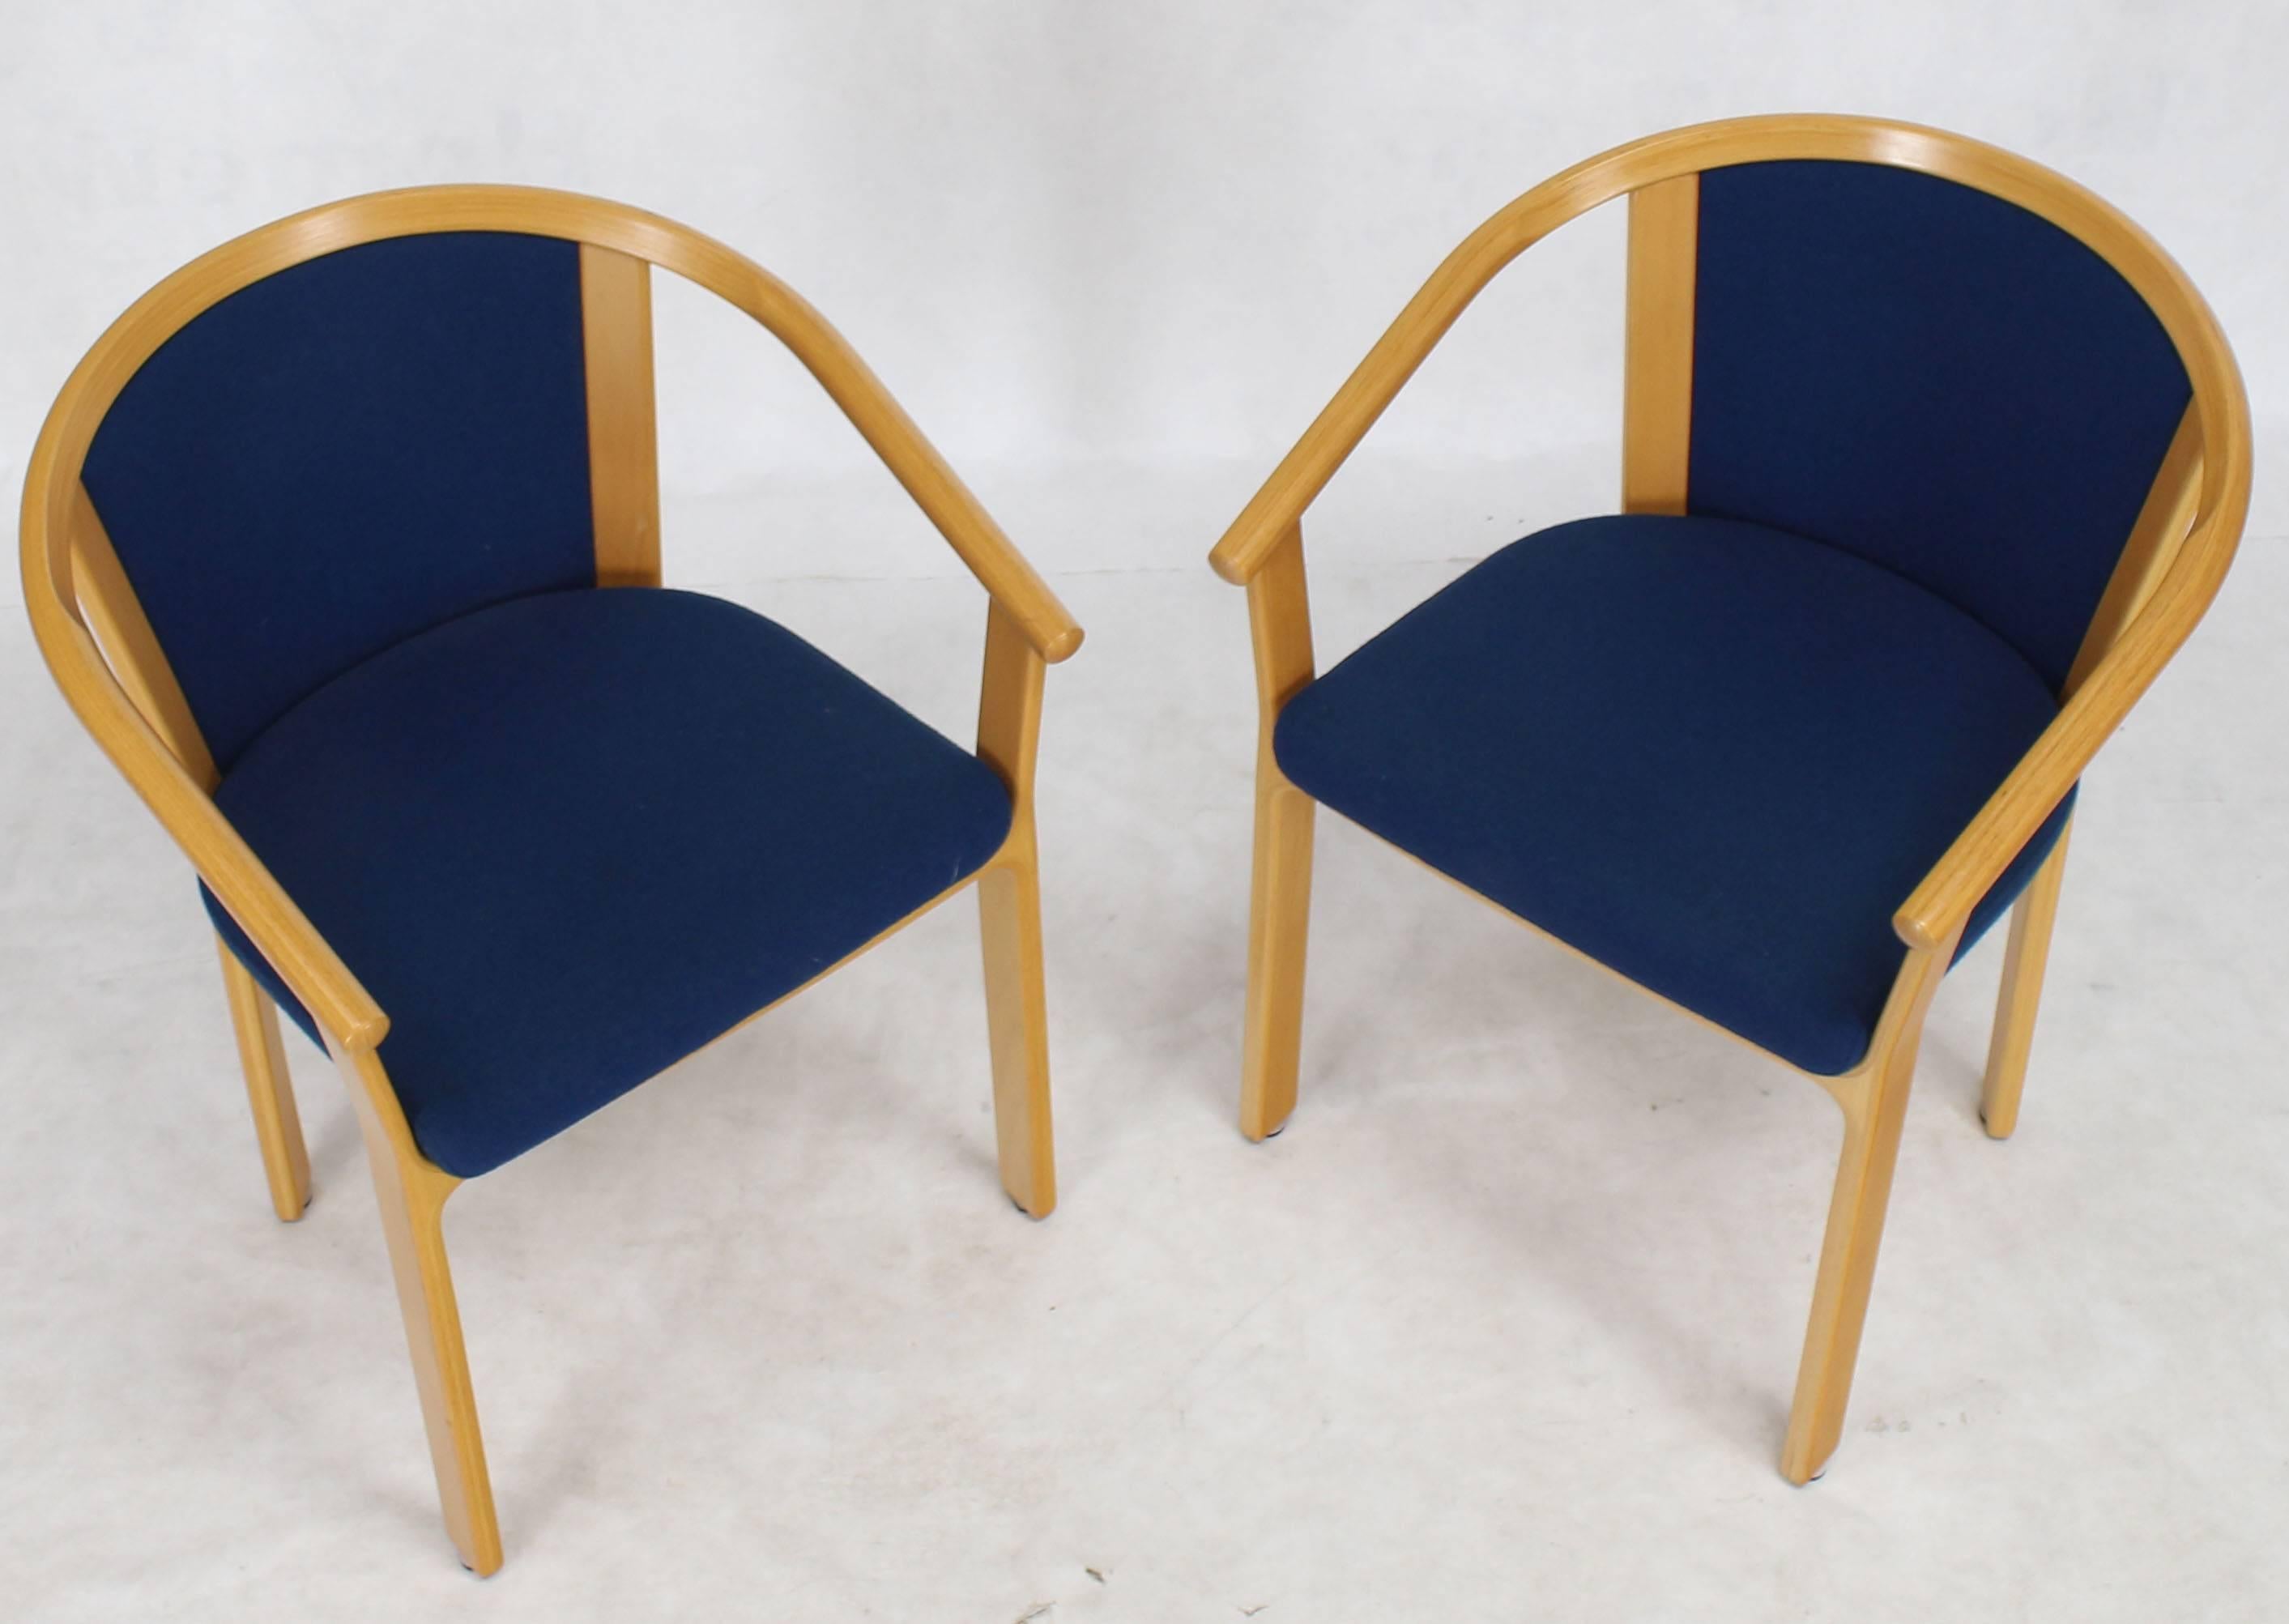 Pair of Danish Modern Barrel Back Chairs In Excellent Condition For Sale In Rockaway, NJ